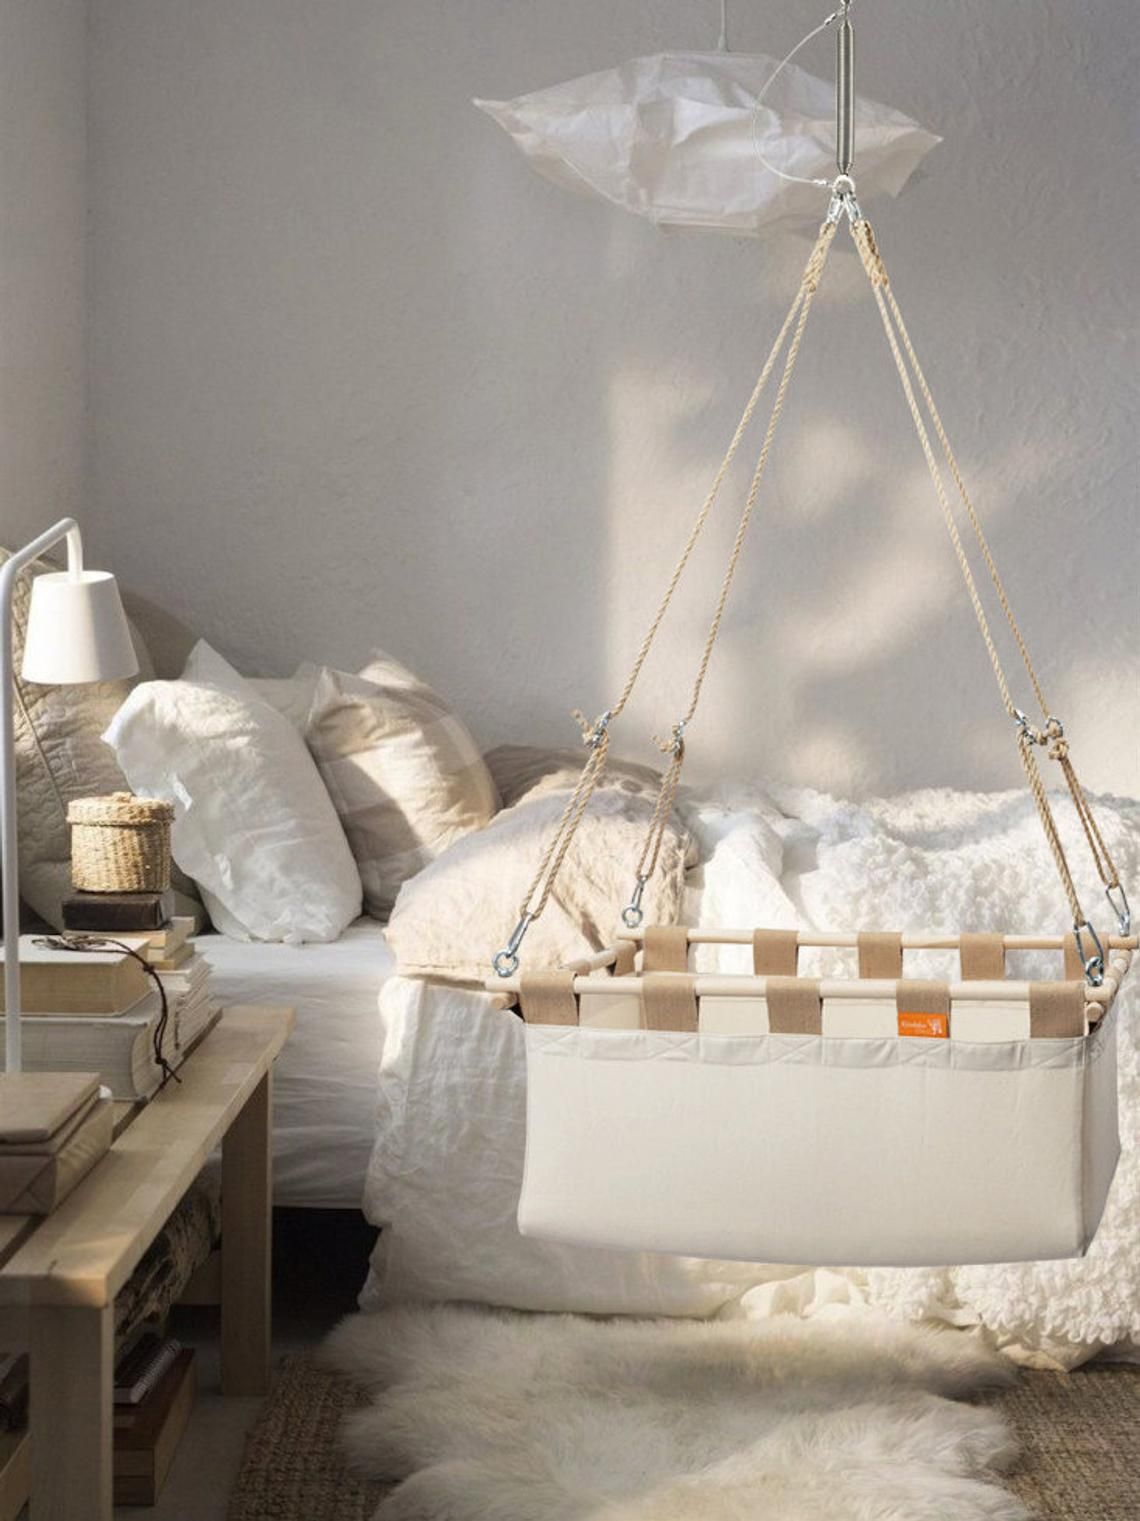 Hanging Cribs Are the Newest—And Most Affordable—Trend For Your Nursery